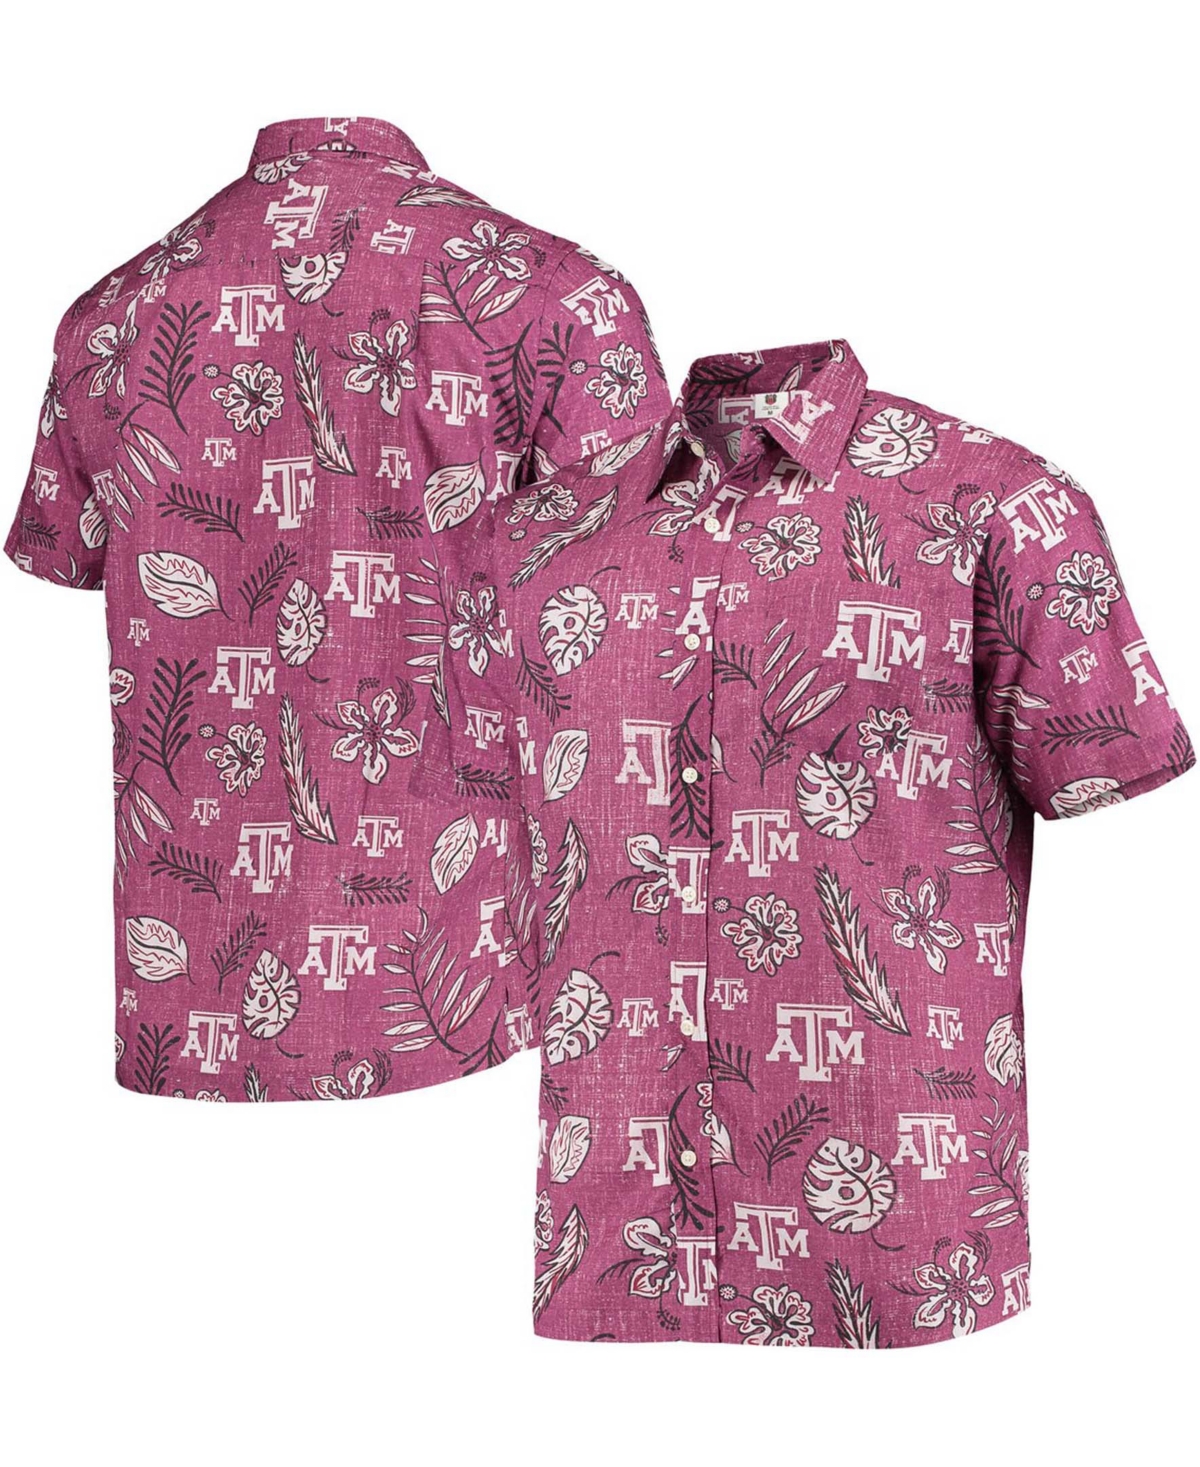 Shop Wes & Willy Men's Maroon Texas A M Aggies Vintage-like Floral Button-up Shirt